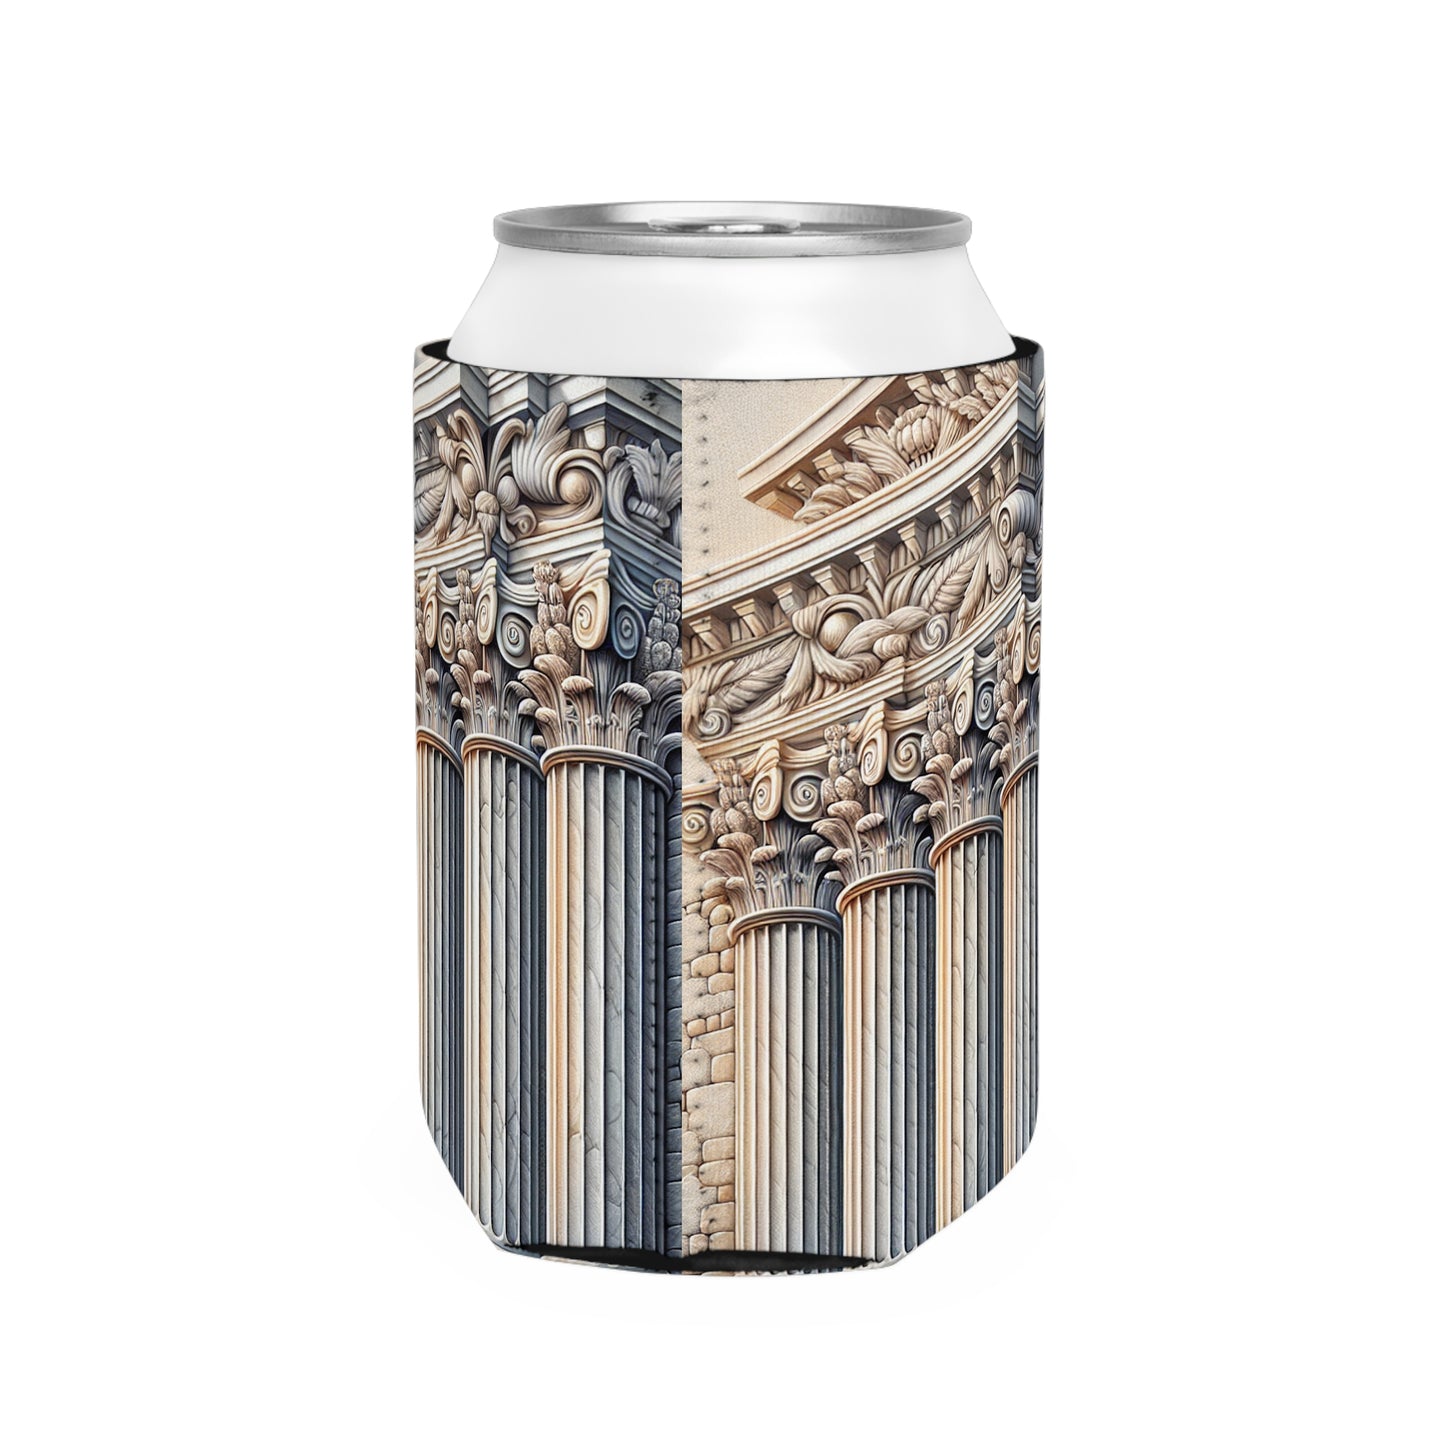 "3D Wall Columns: An Architectural Artpiece" - The Alien Can Cooler Sleeve Trompe-l'oeil Style